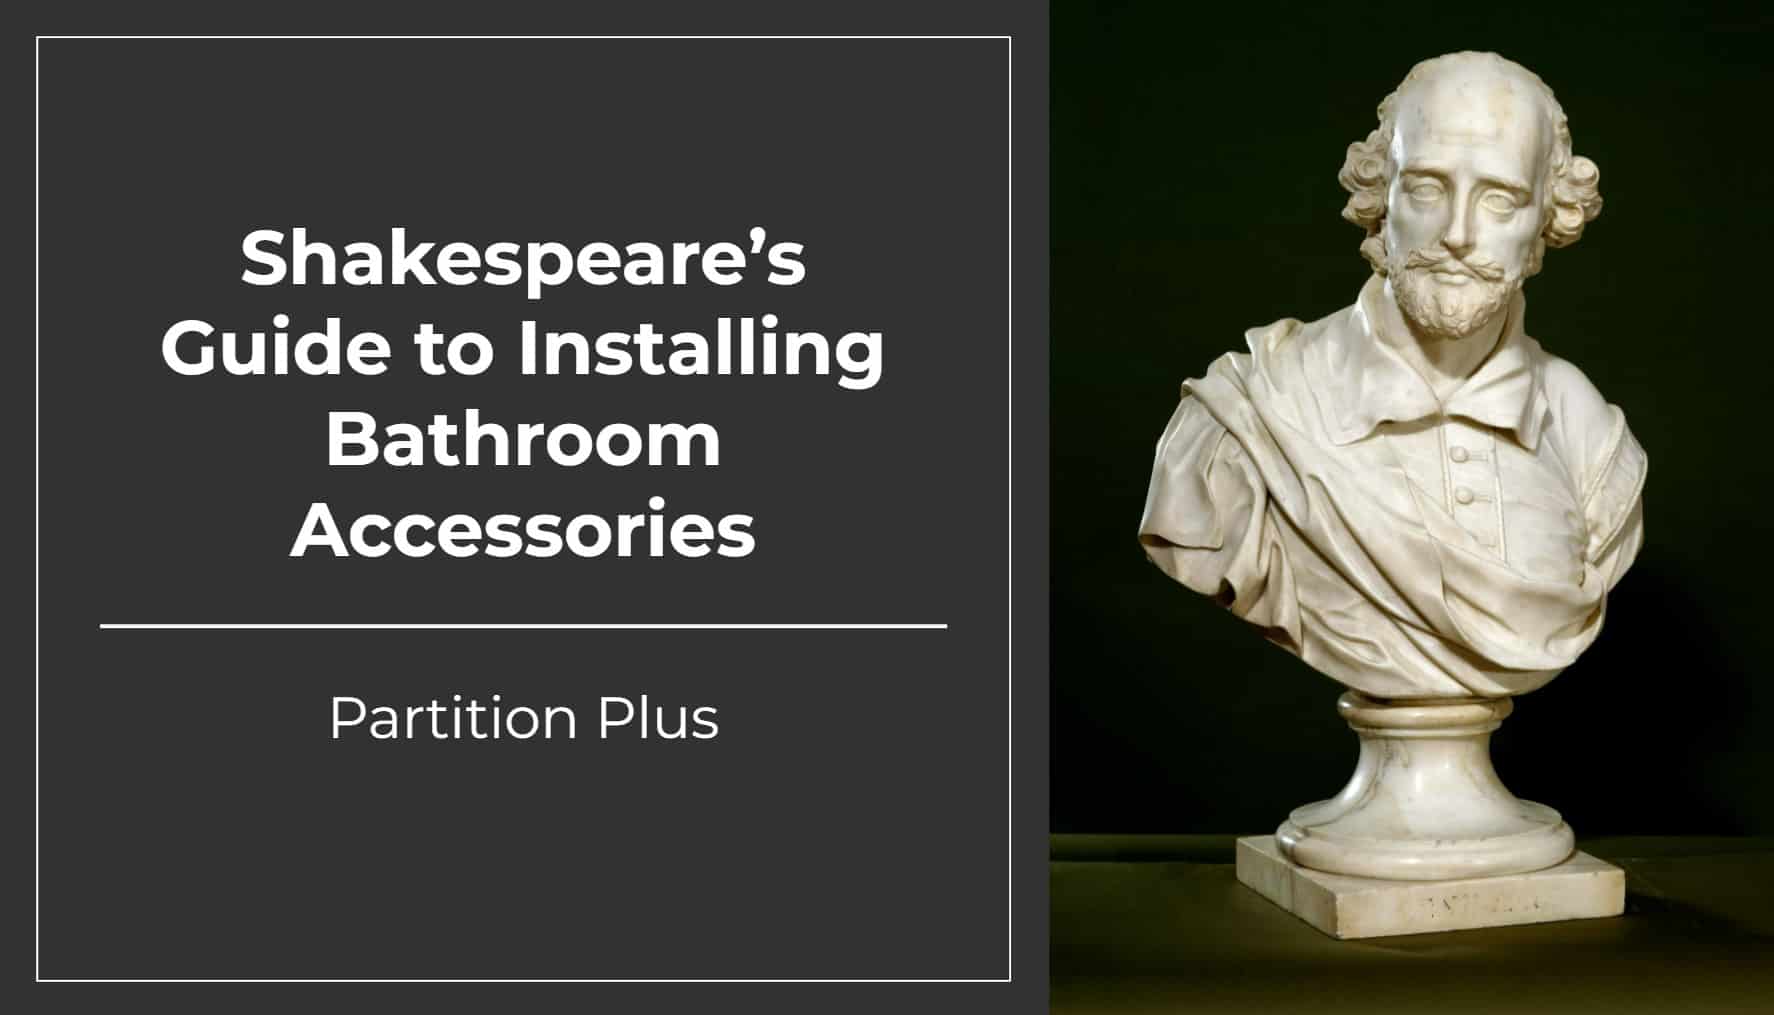 Shakespeare’s Guide to Installing Bathroom Accessories